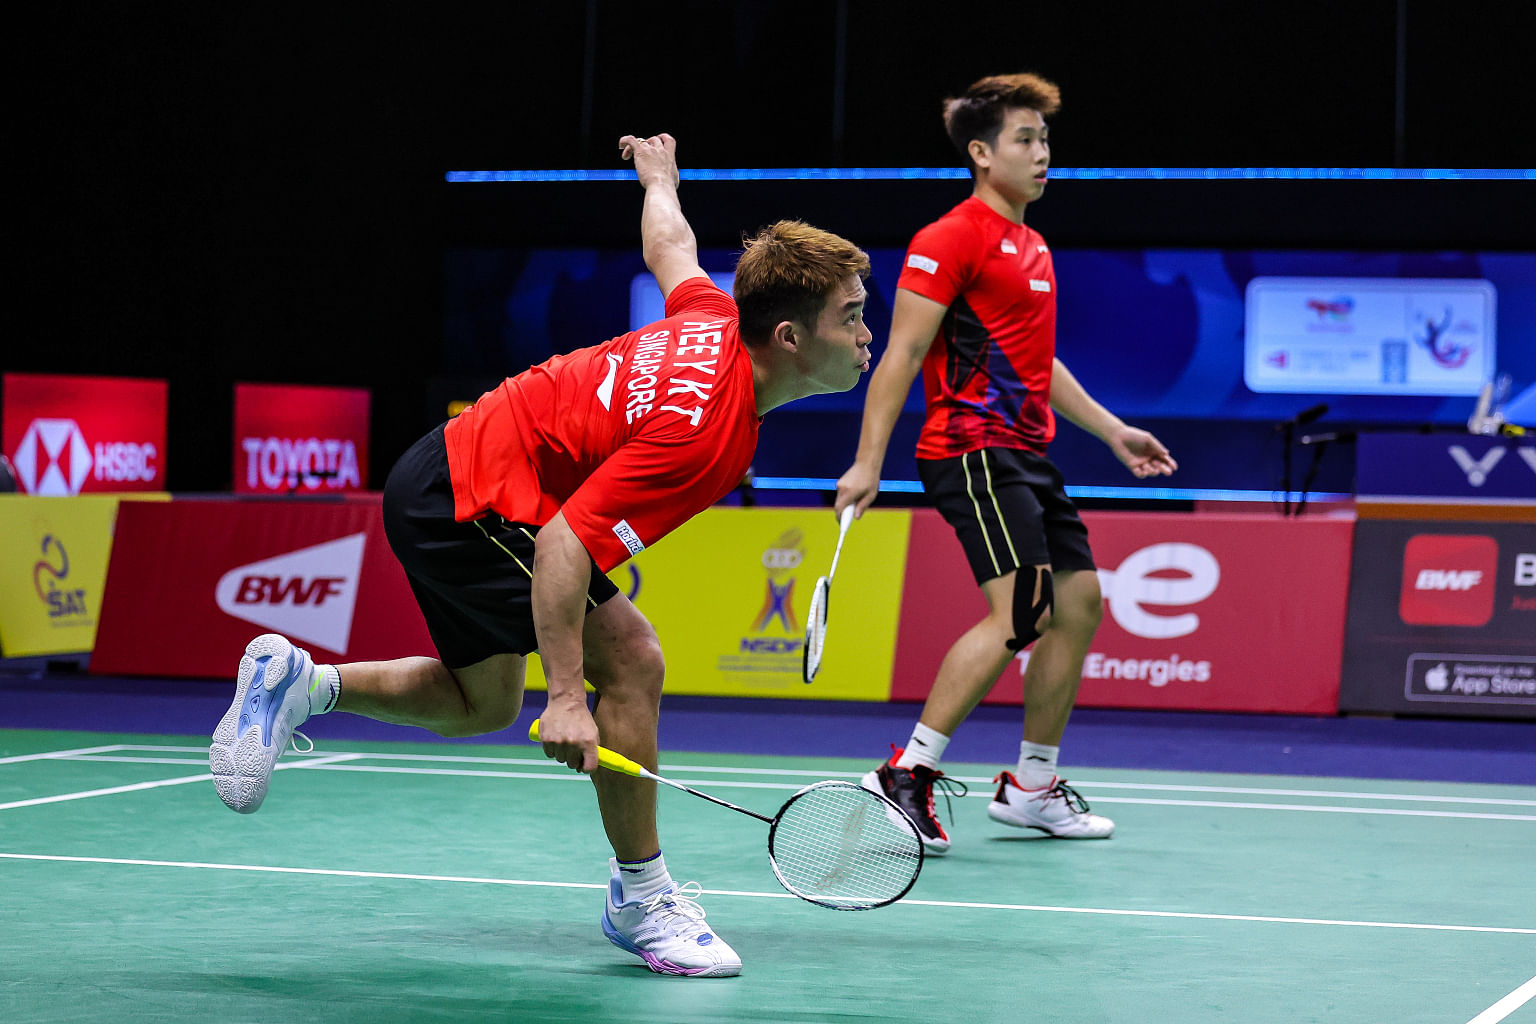 Badminton Singapores Thomas Cup hopes end with 3-2 loss to South Korea The Straits Times